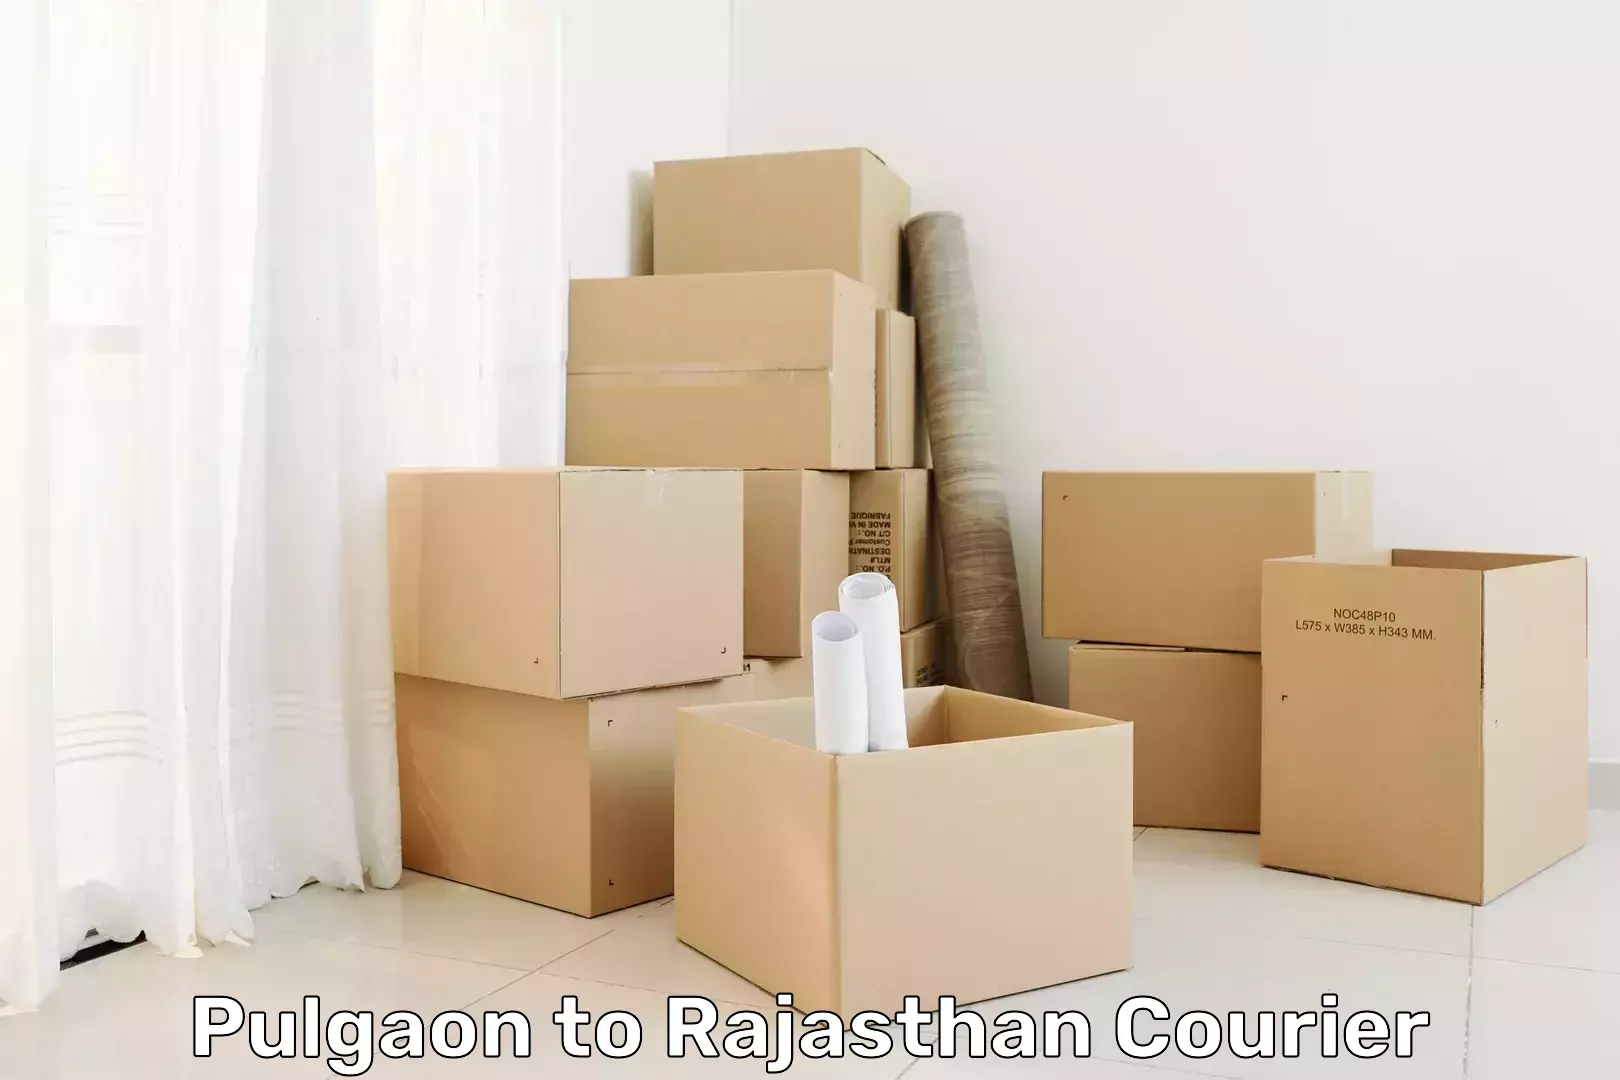 Delivery service partnership Pulgaon to Rajasthan